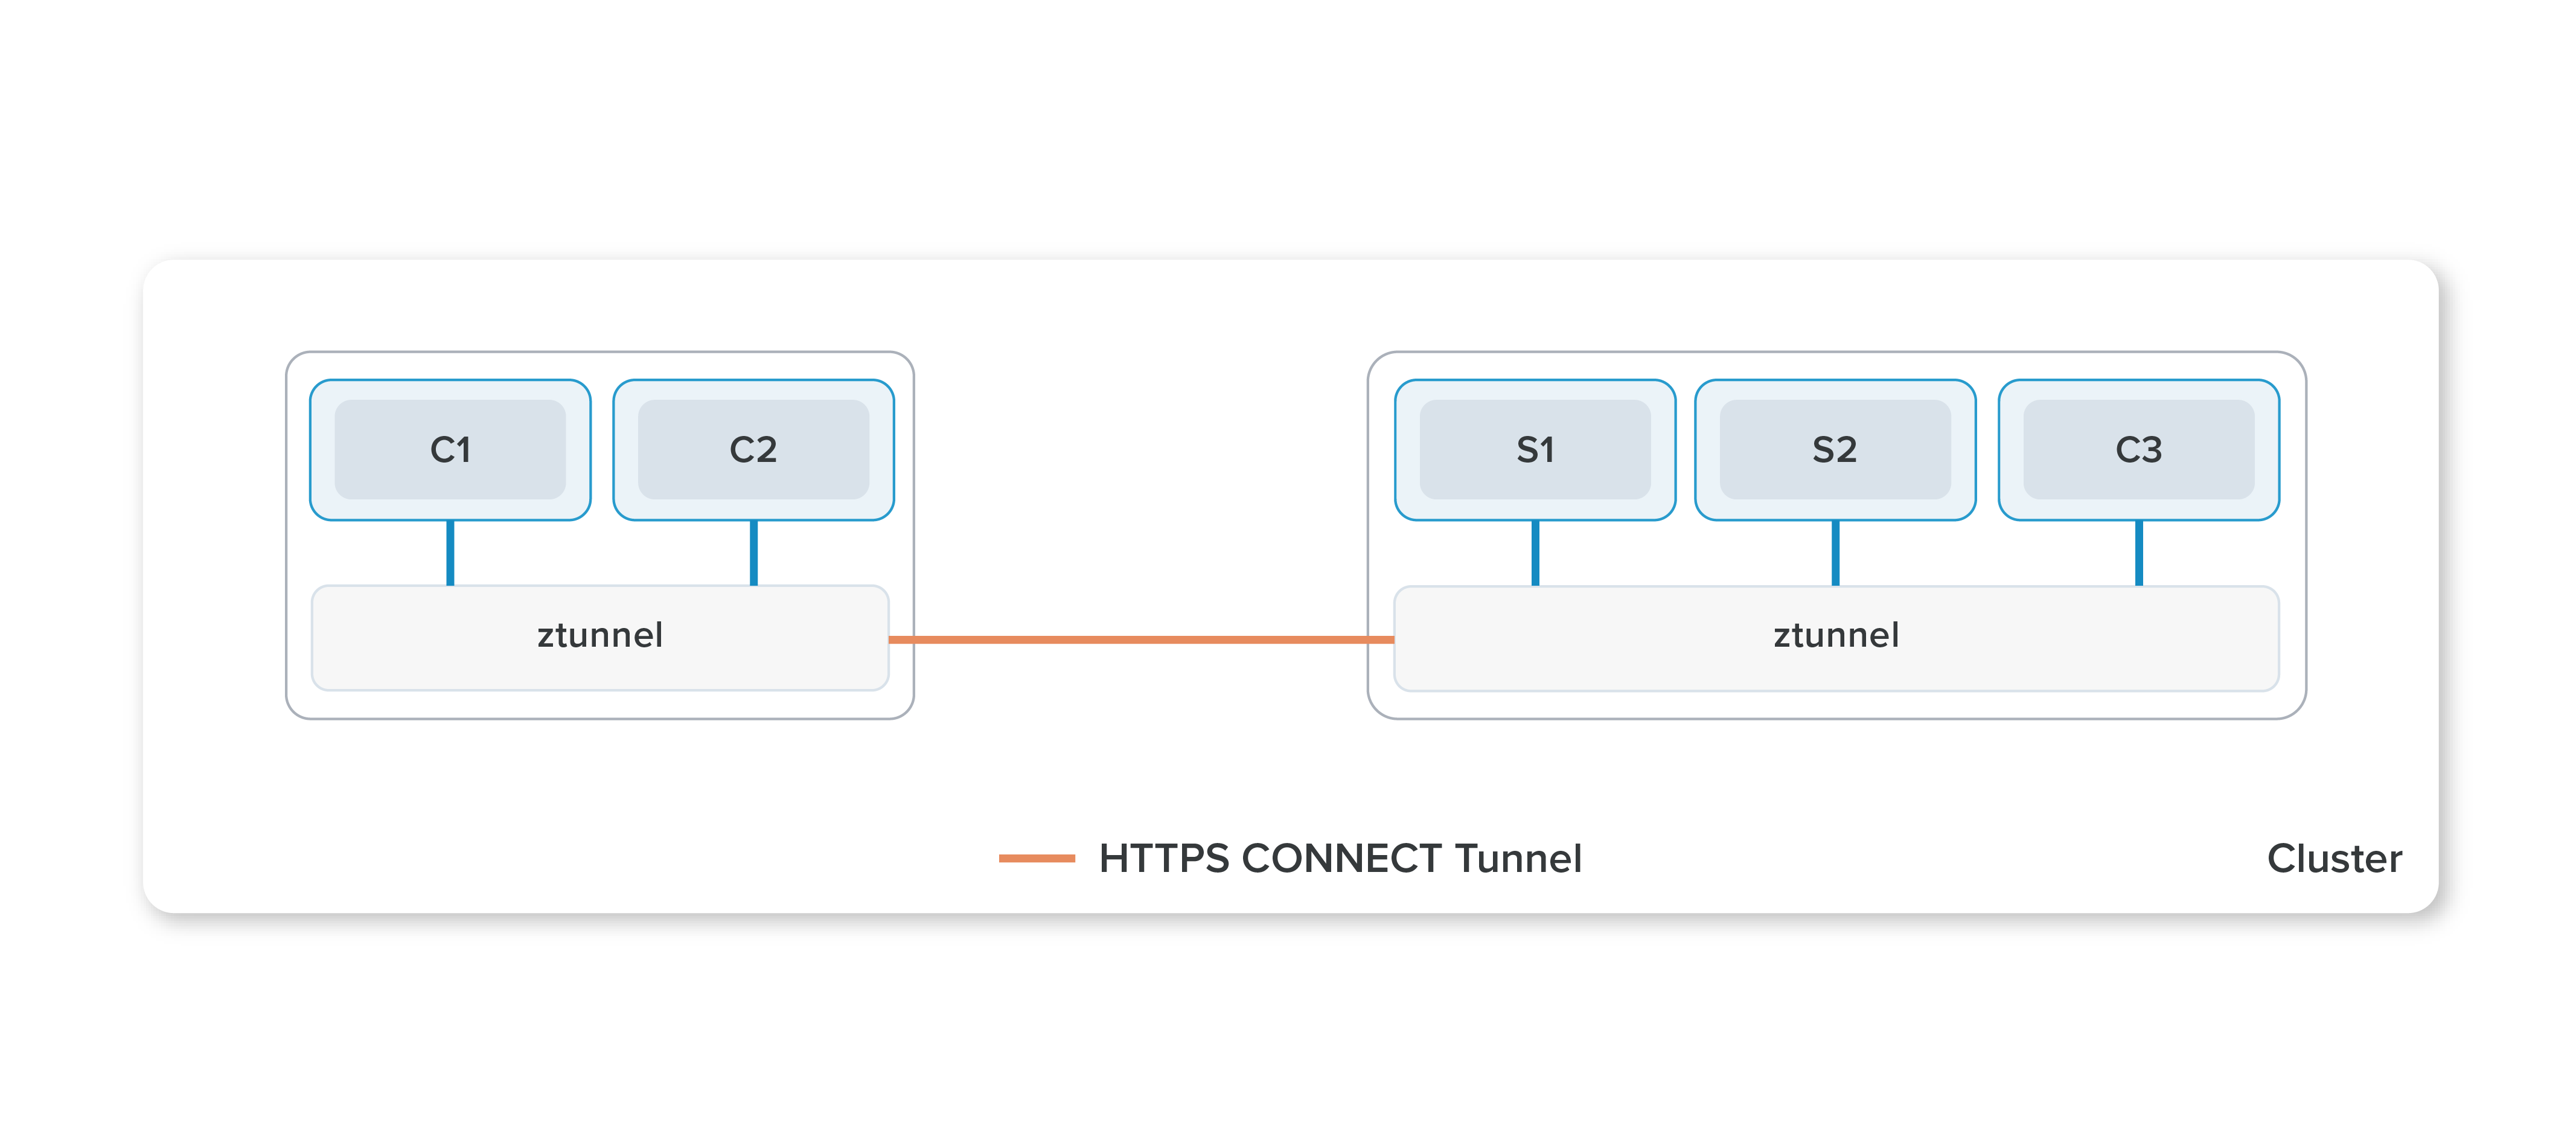 Ambient mesh uses a shared, per-node ztunnel to provide a zero-trust secure overlay